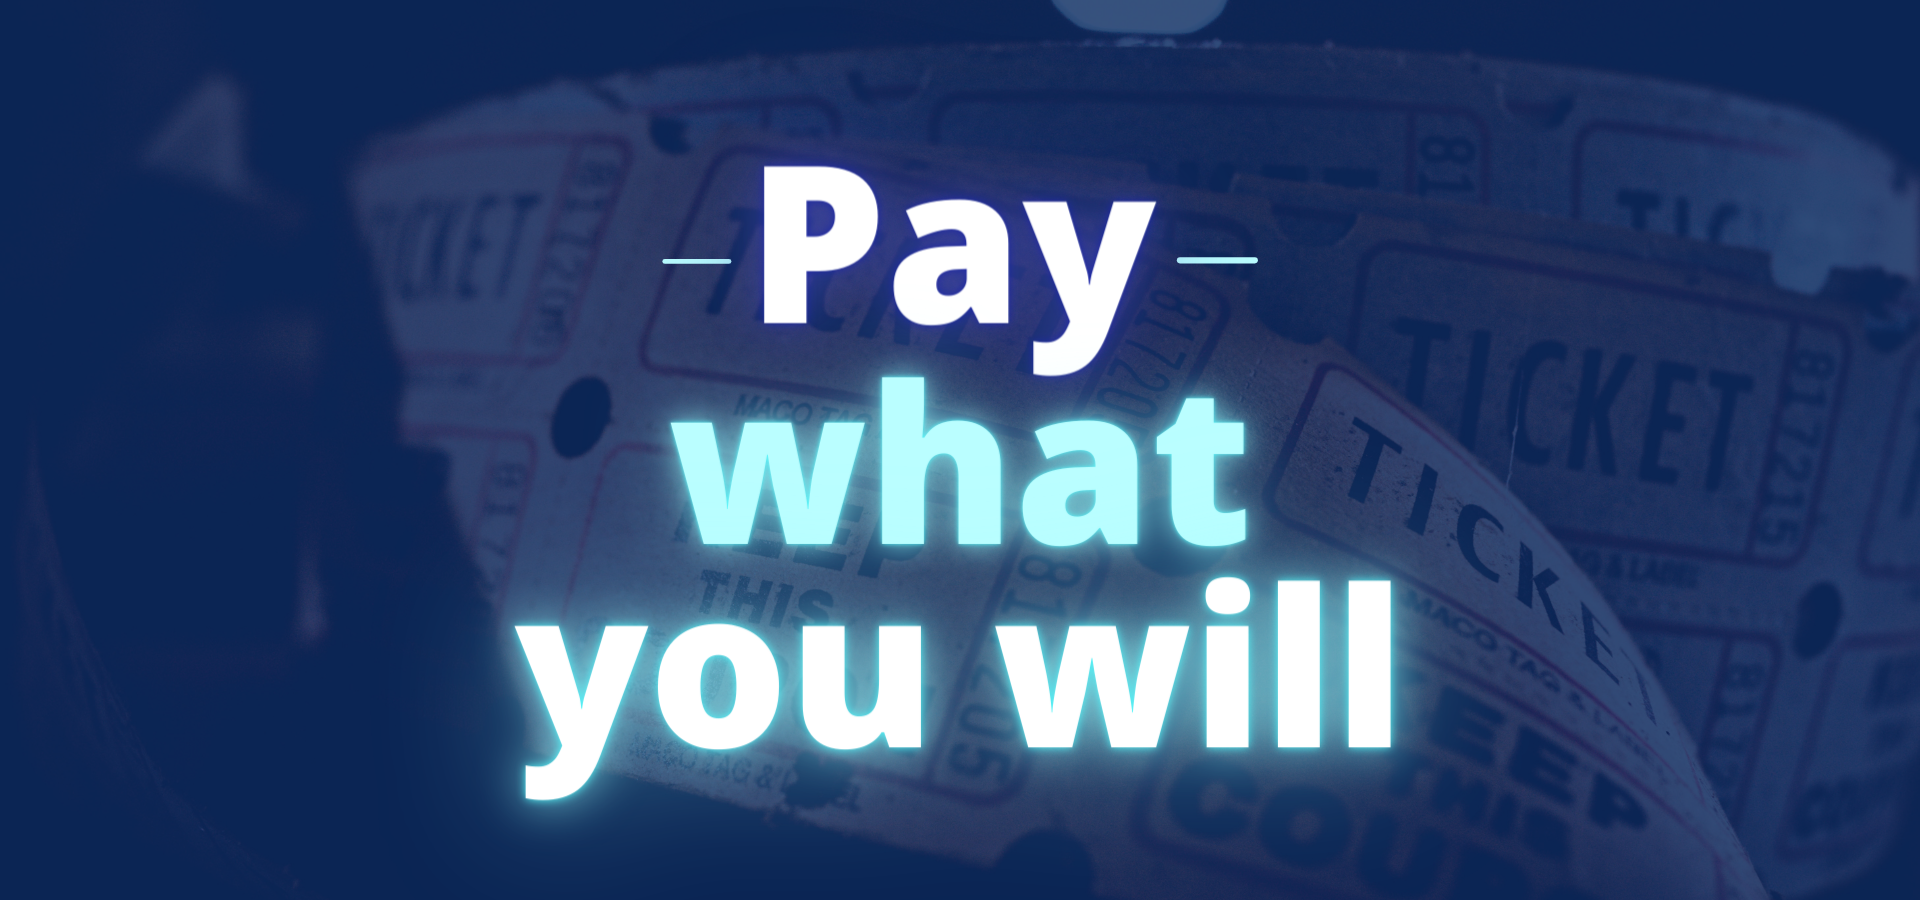 Introducing Pay-What-You-Will Nights 